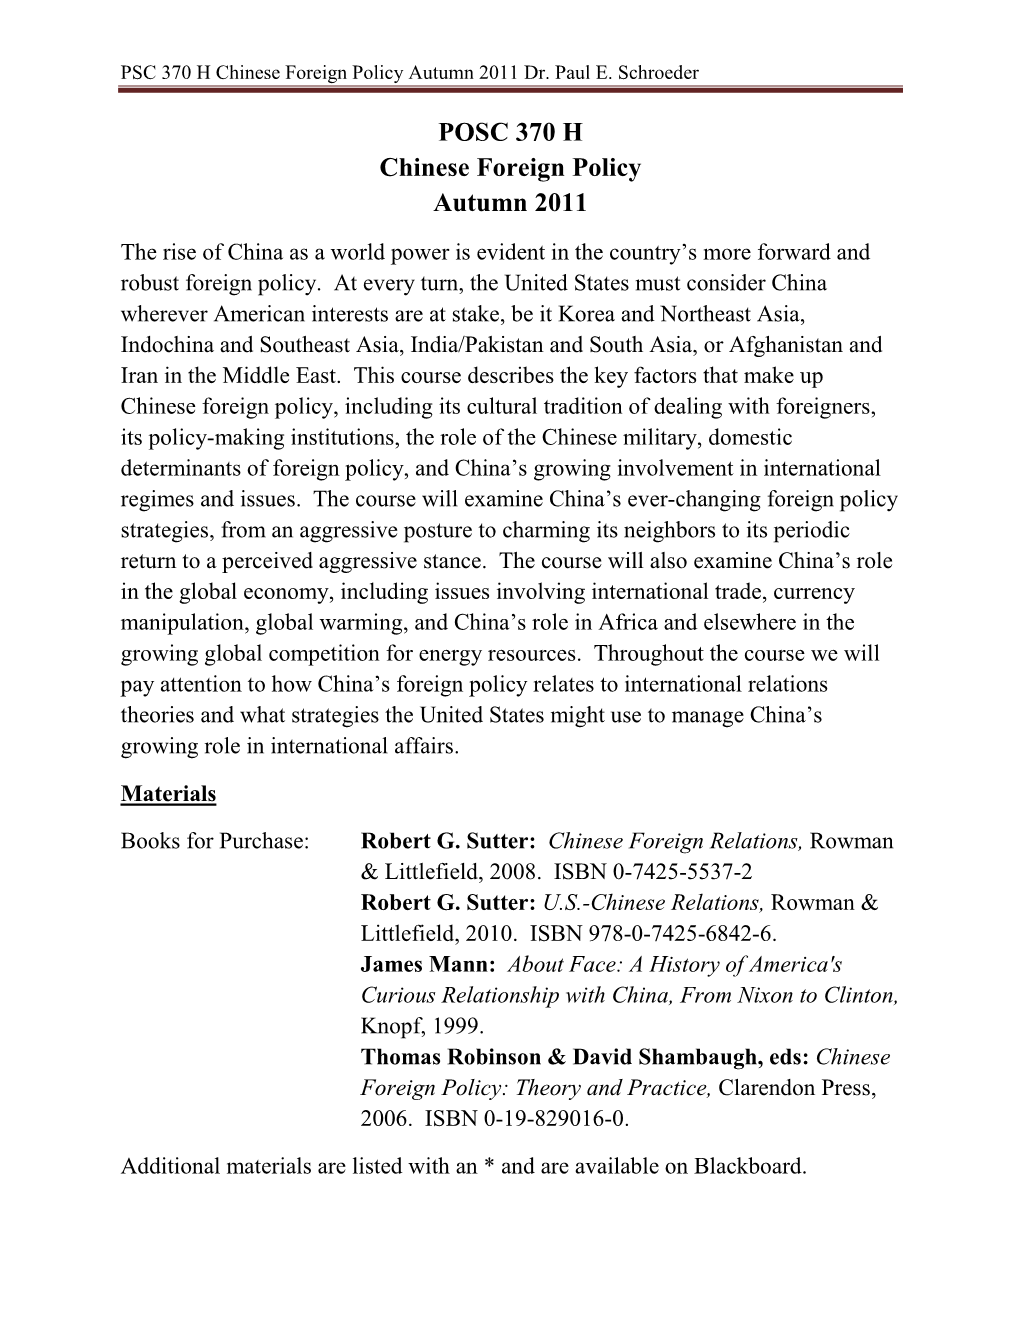 PSC 370 H Chinese Foreign Policy Autumn 2011 Dr. Paul E. Schroeder